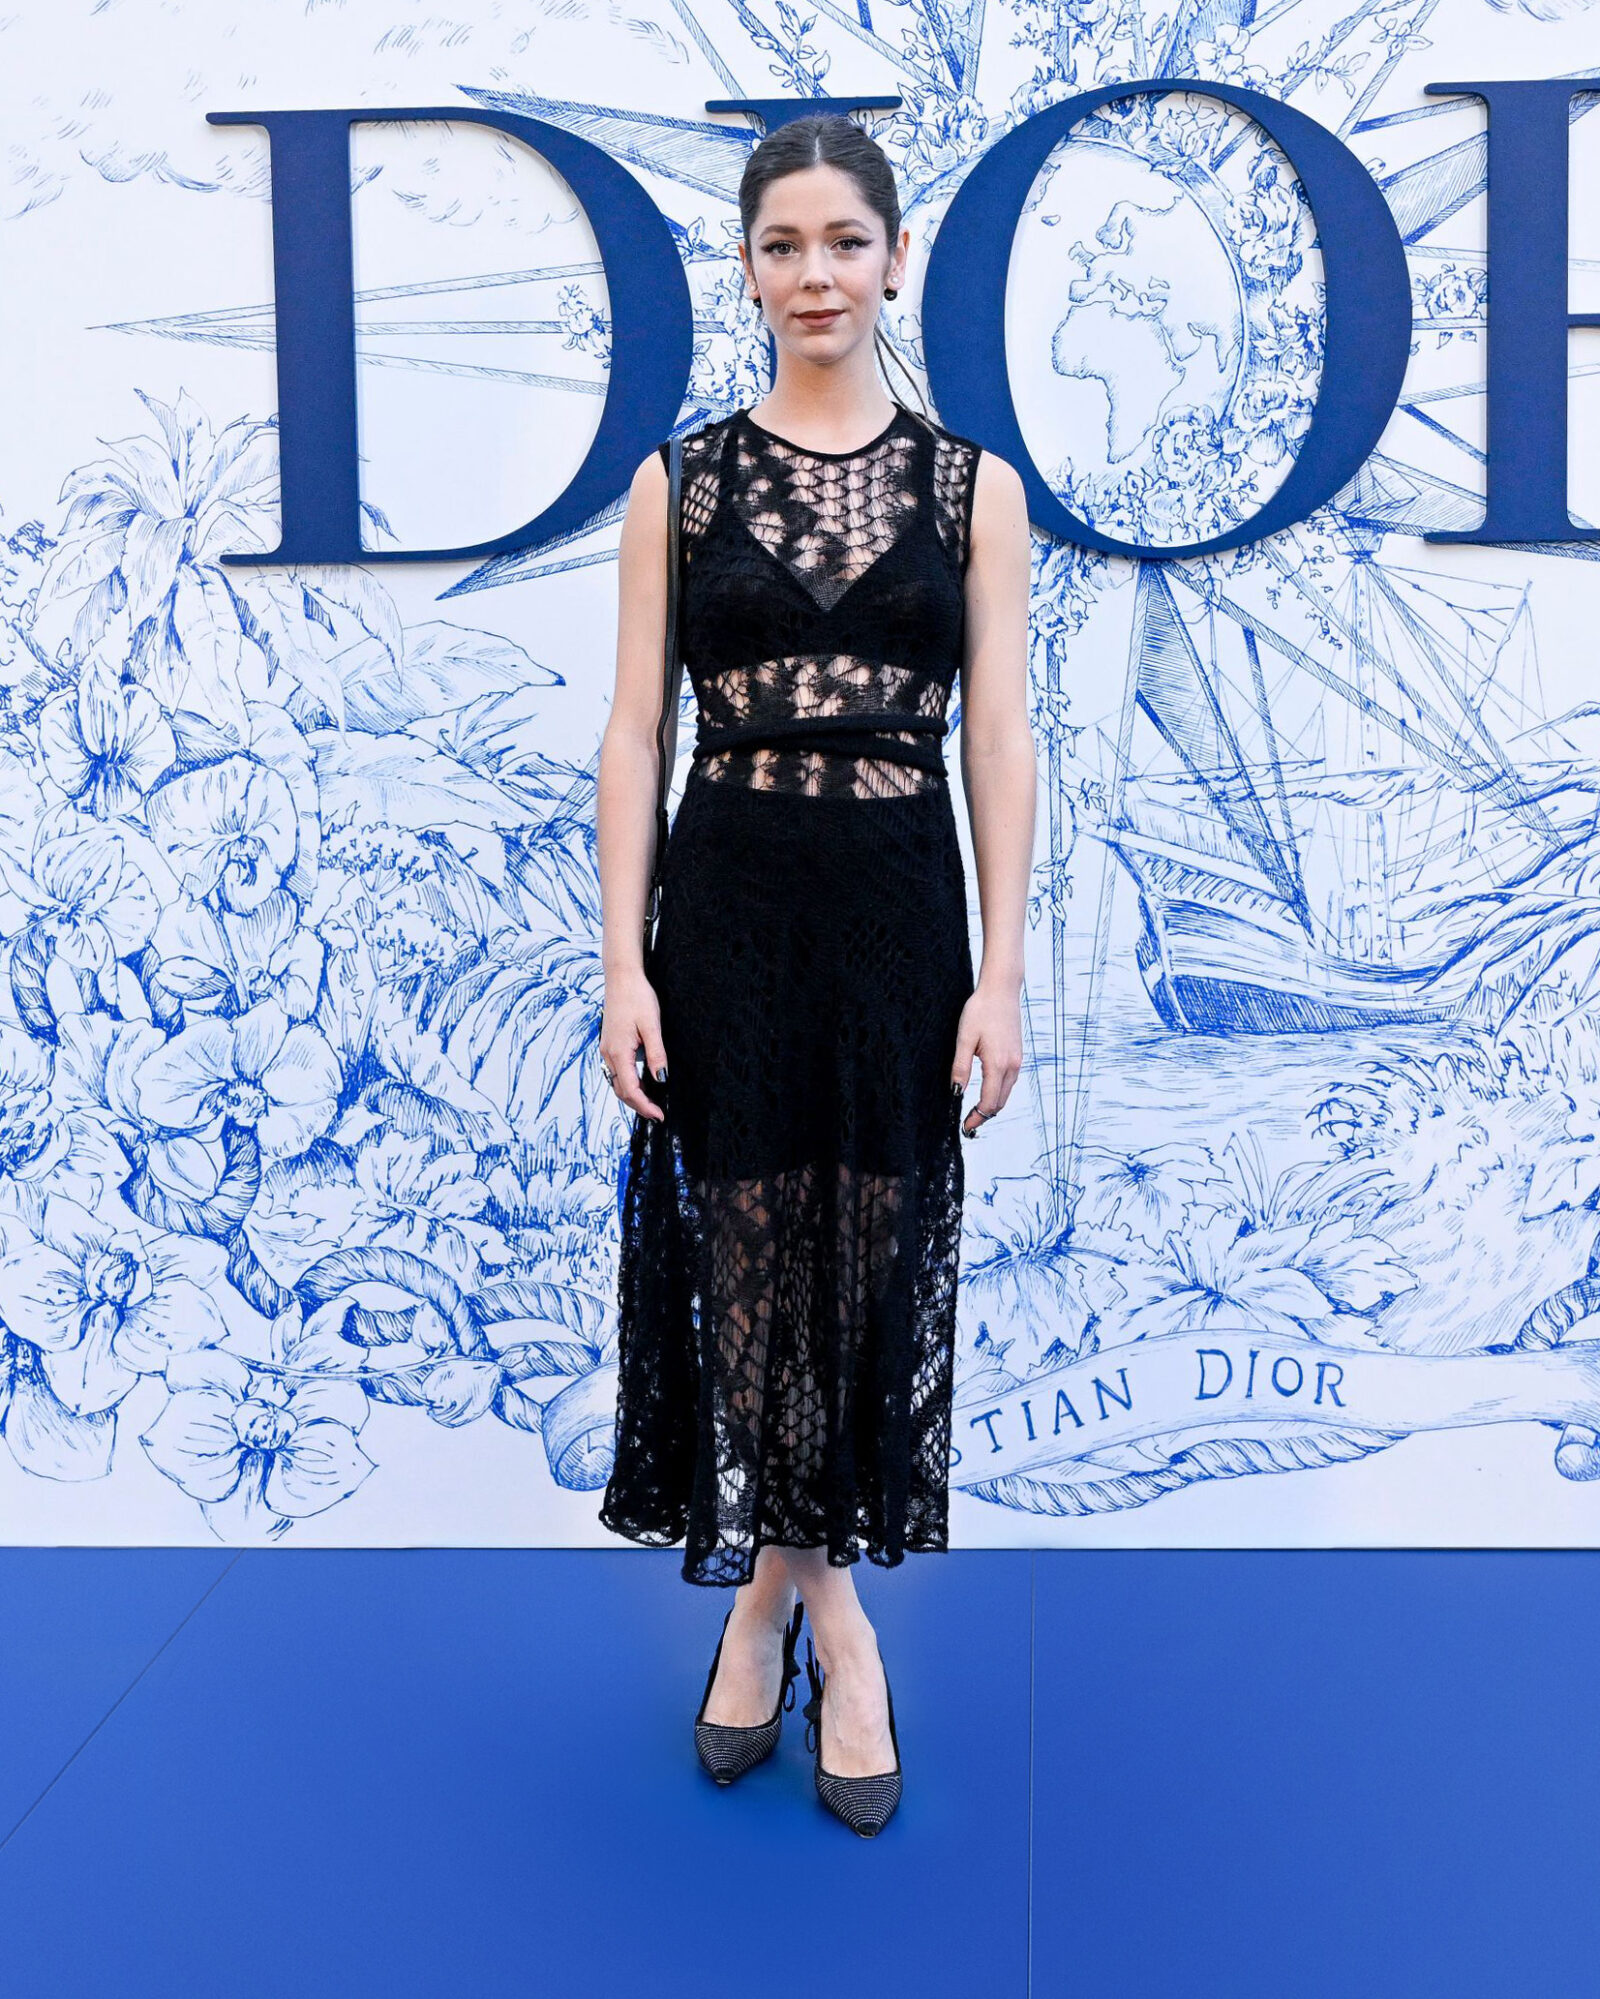 SEVILLE, SPAIN - JUNE 16: Georgina Amoros attends &quot;Crucero Collection&quot; fashion show presentation by Dior at Plaza de España on June 16, 2022 in Seville, Spain. (Photo by Carlos Alvarez/Getty Images for Dior)